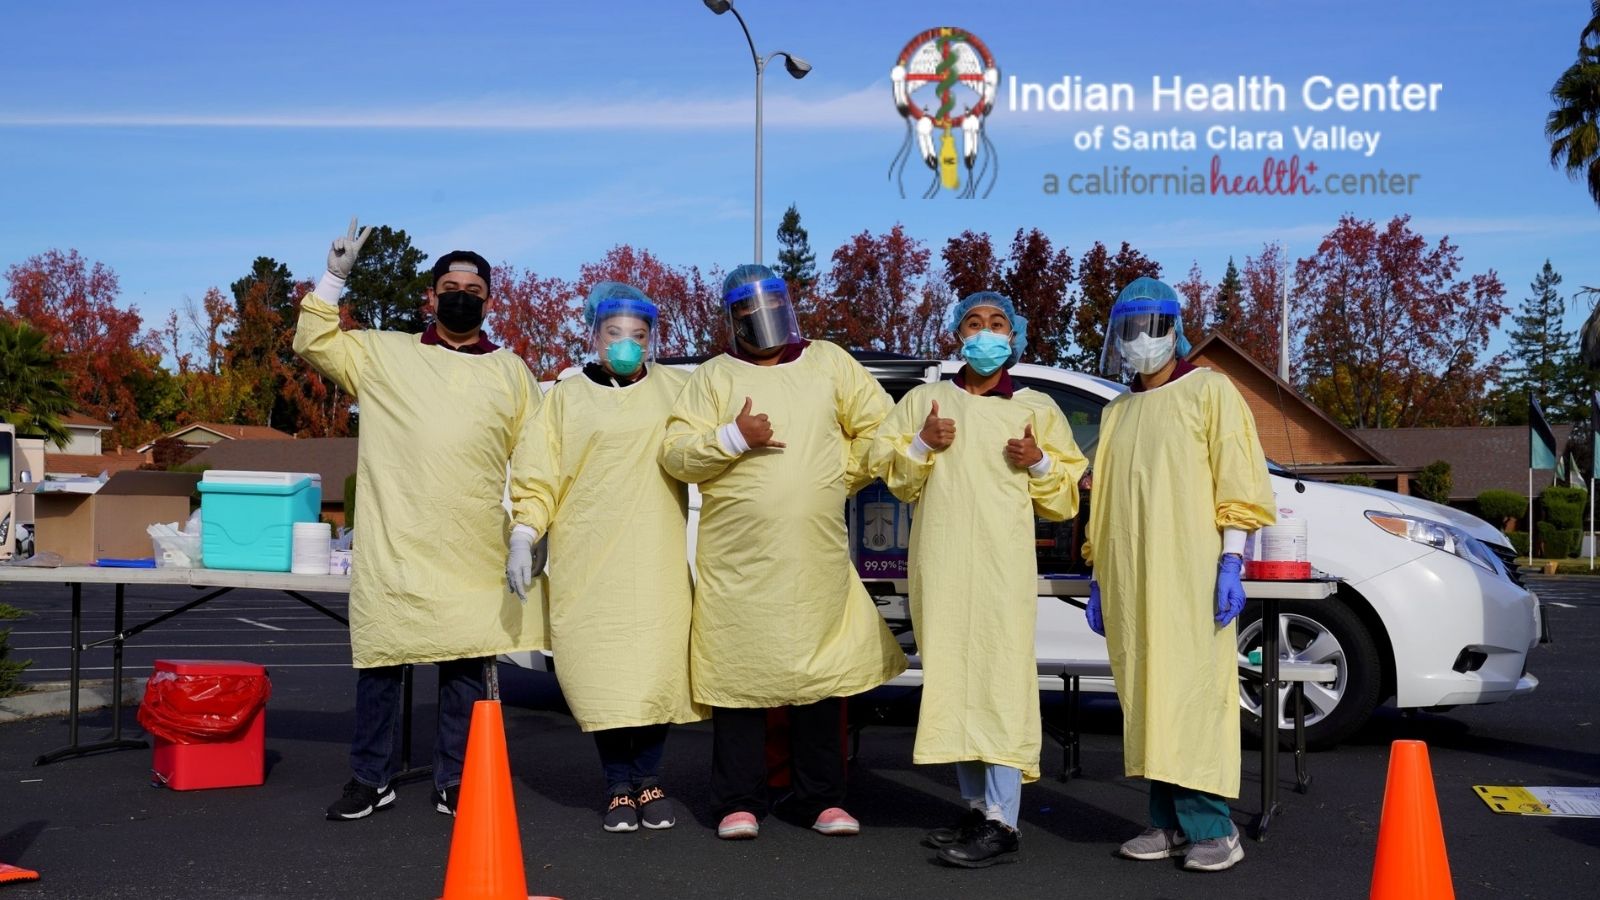 Indian Health Center of Santa Clara Valley and Comcast Business Bridge the Gap in Telehealth Offerings During the Pandemic